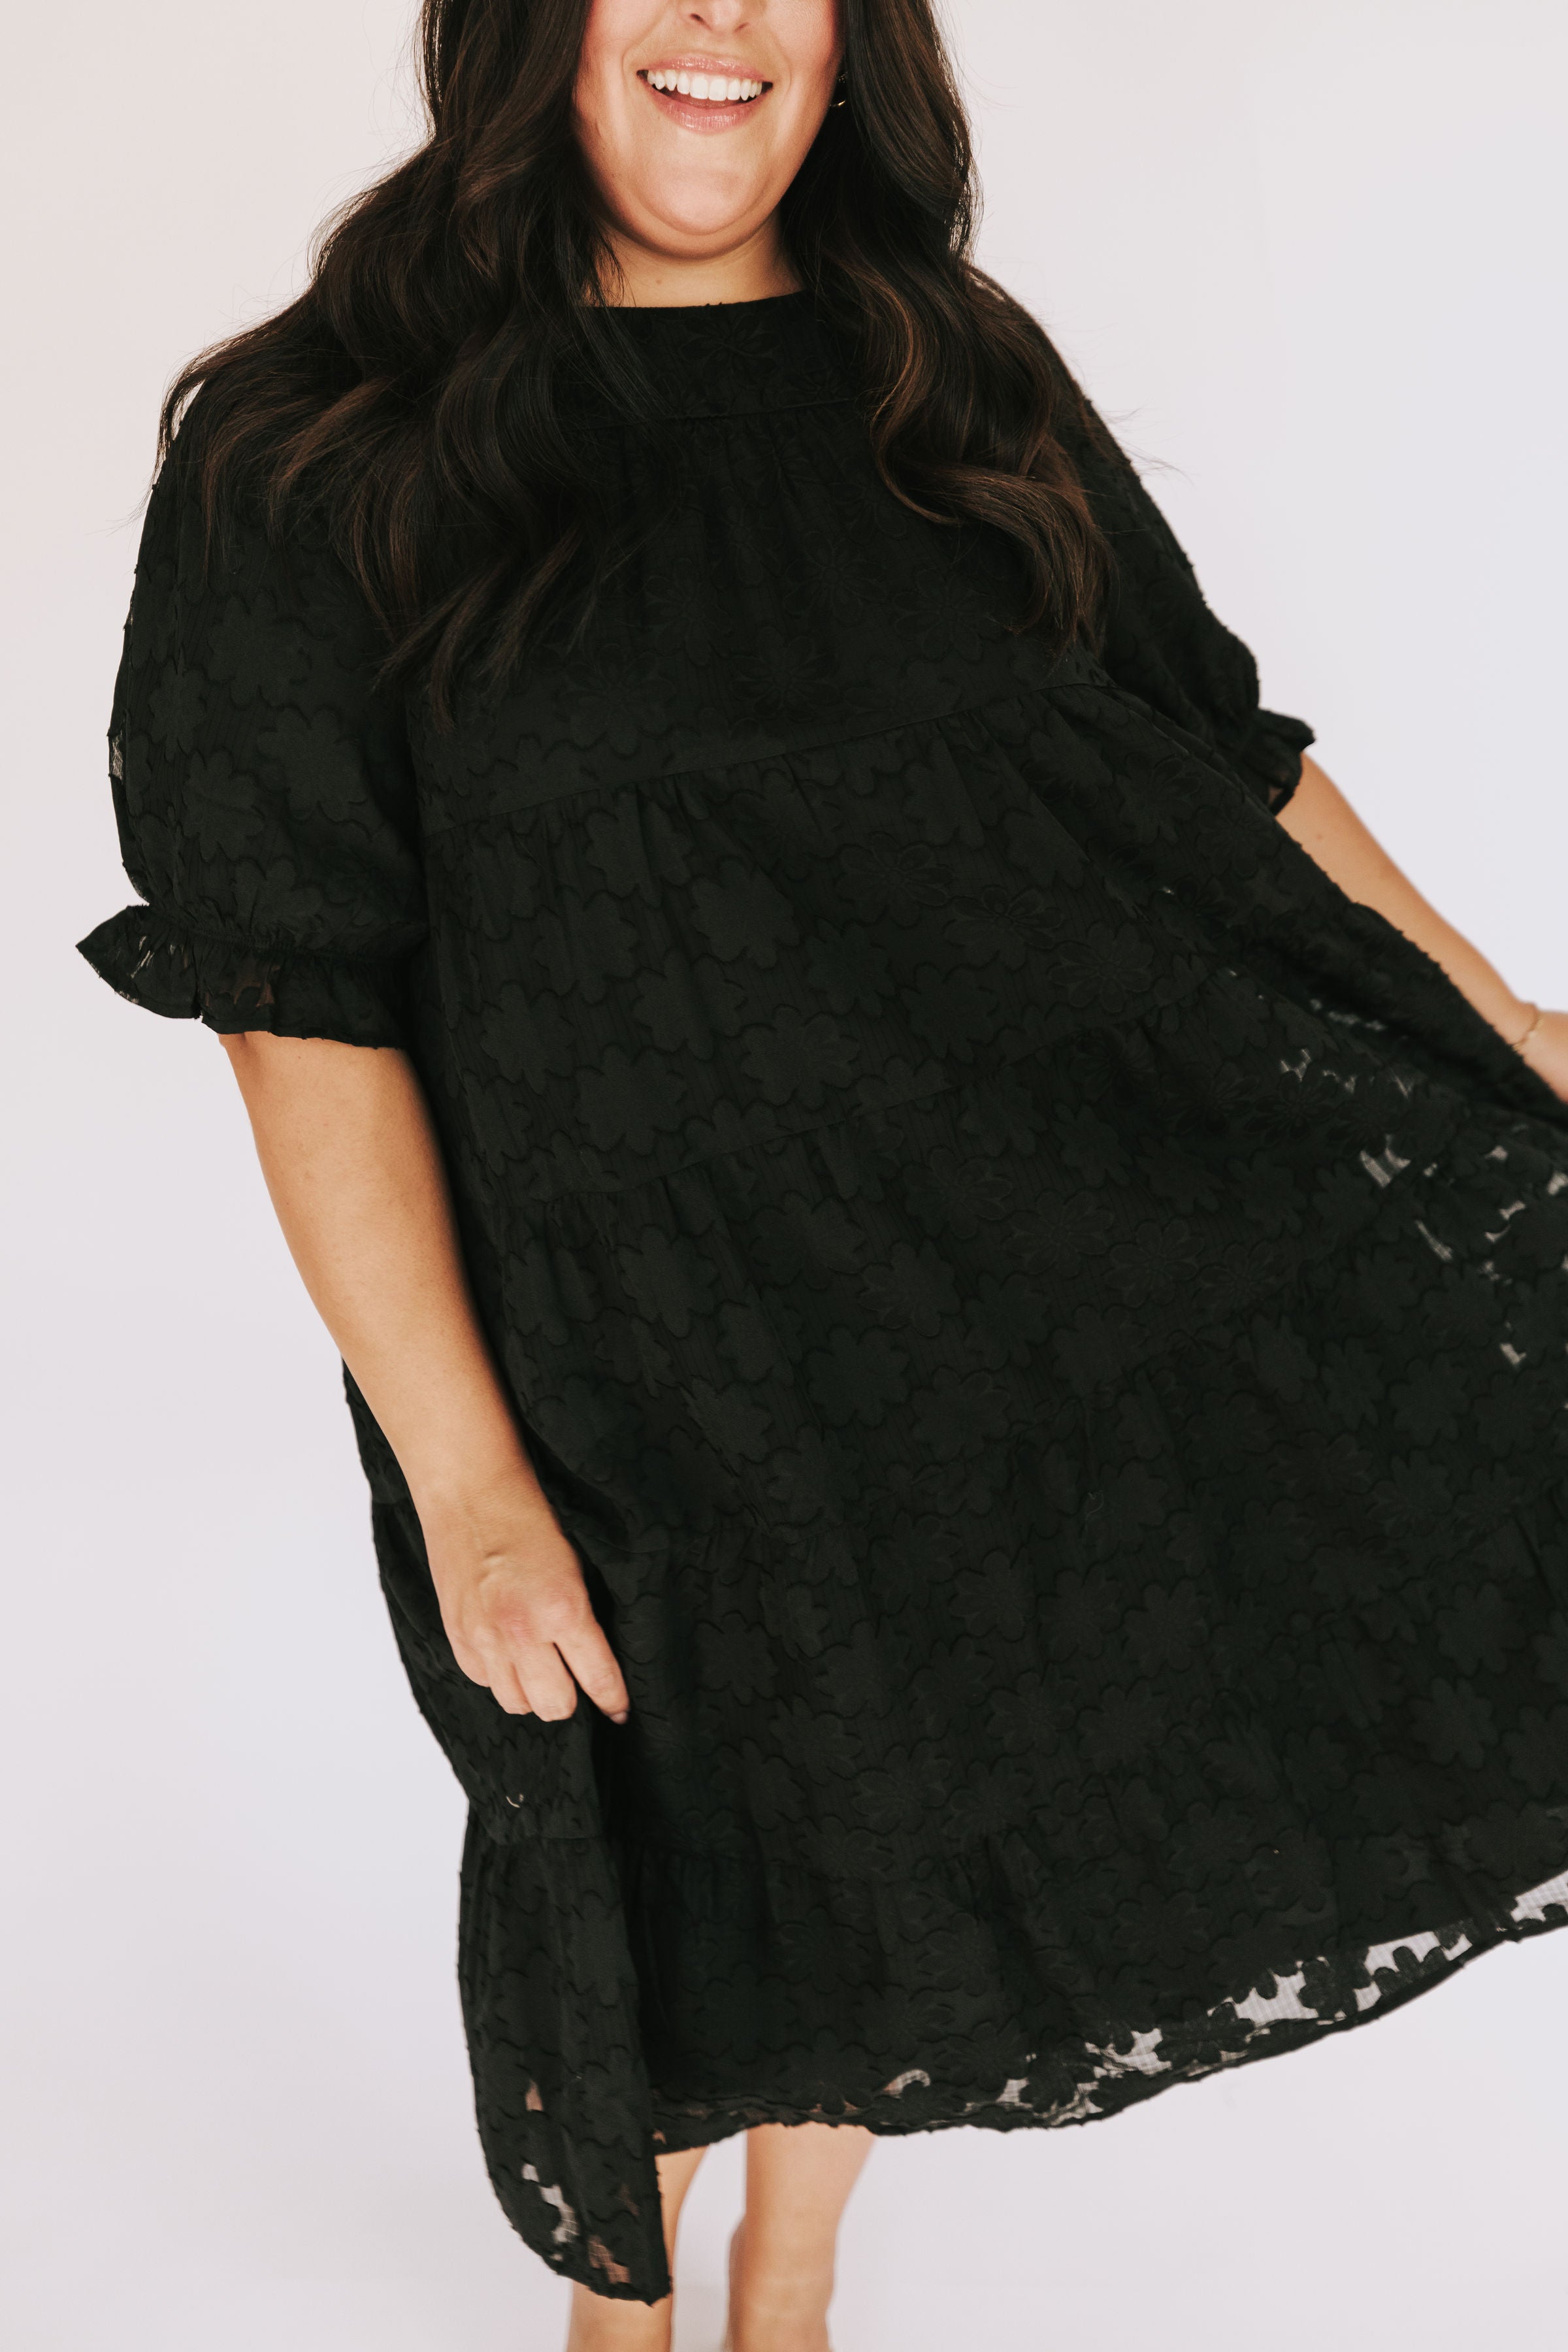 PLUS SIZE - Raving About You Dress